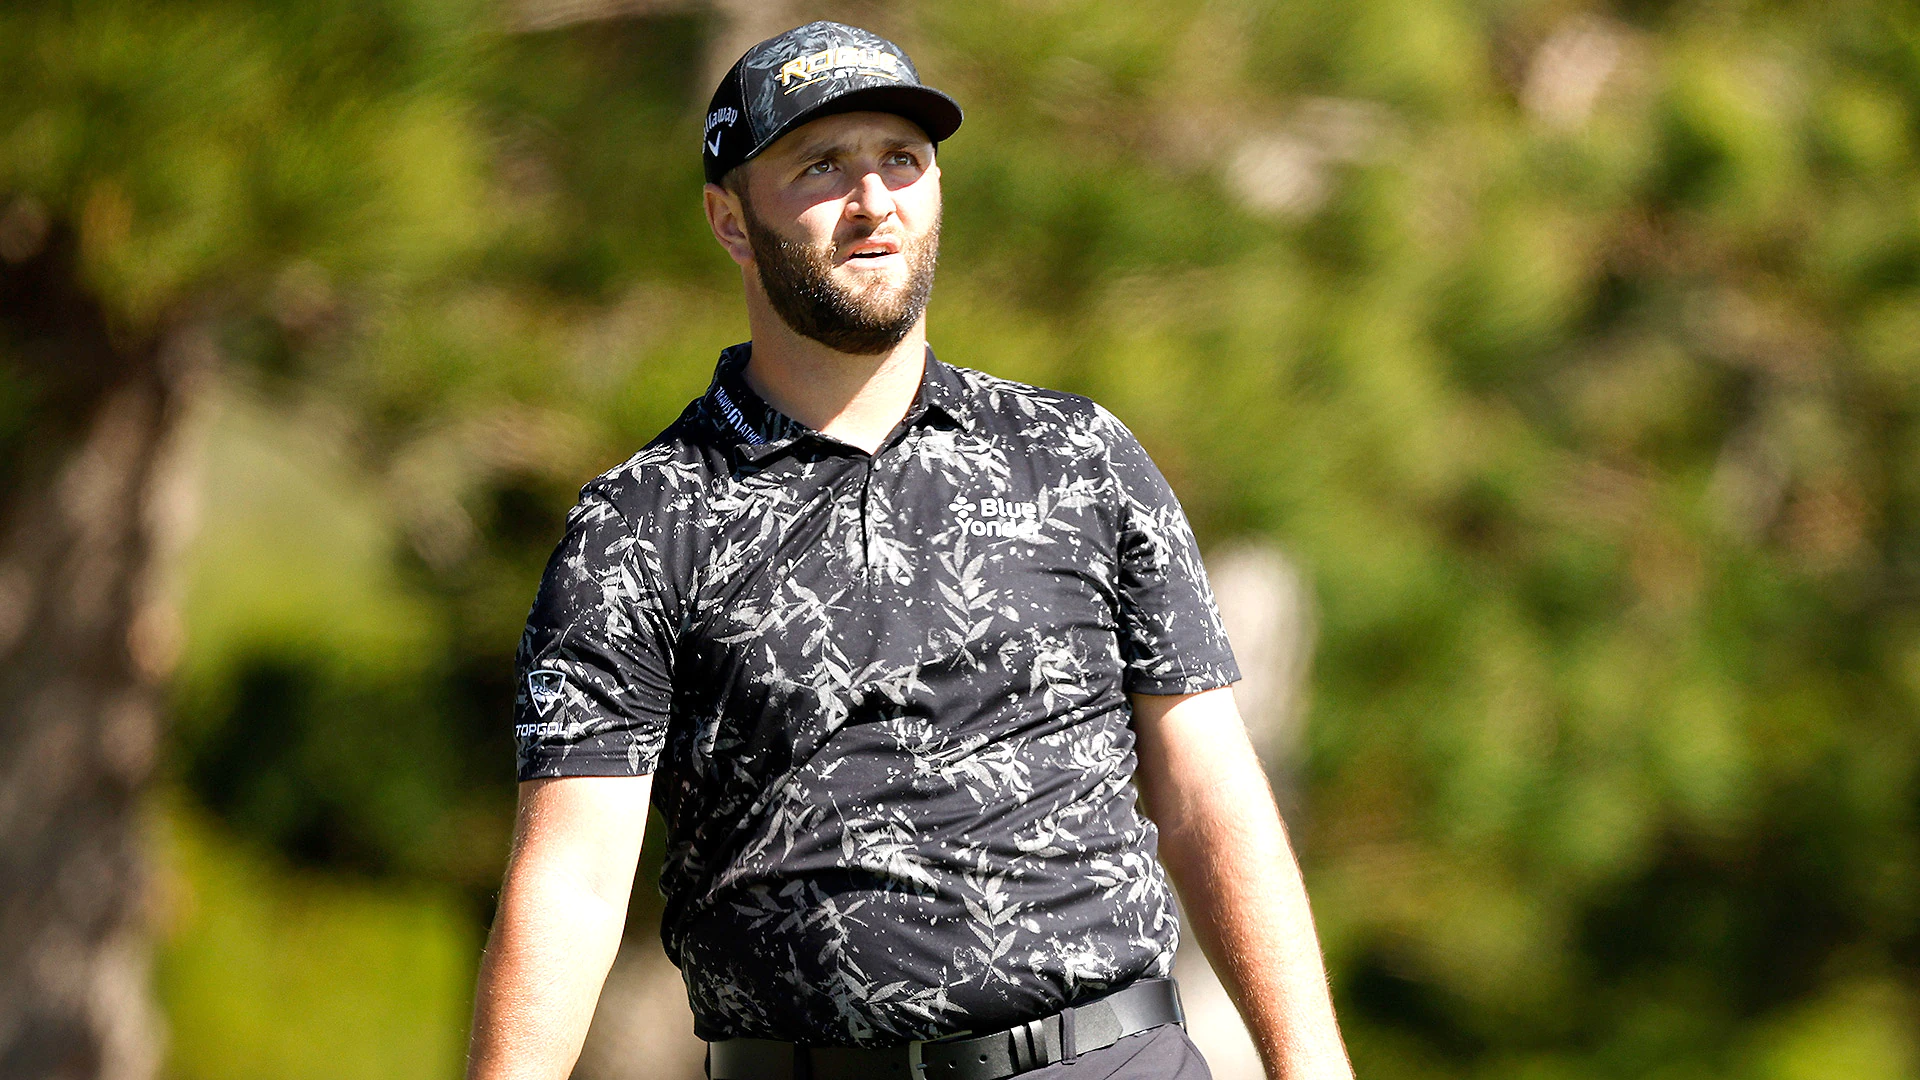 American Express odds: Jon Rahm favored over Patrick Cantlay